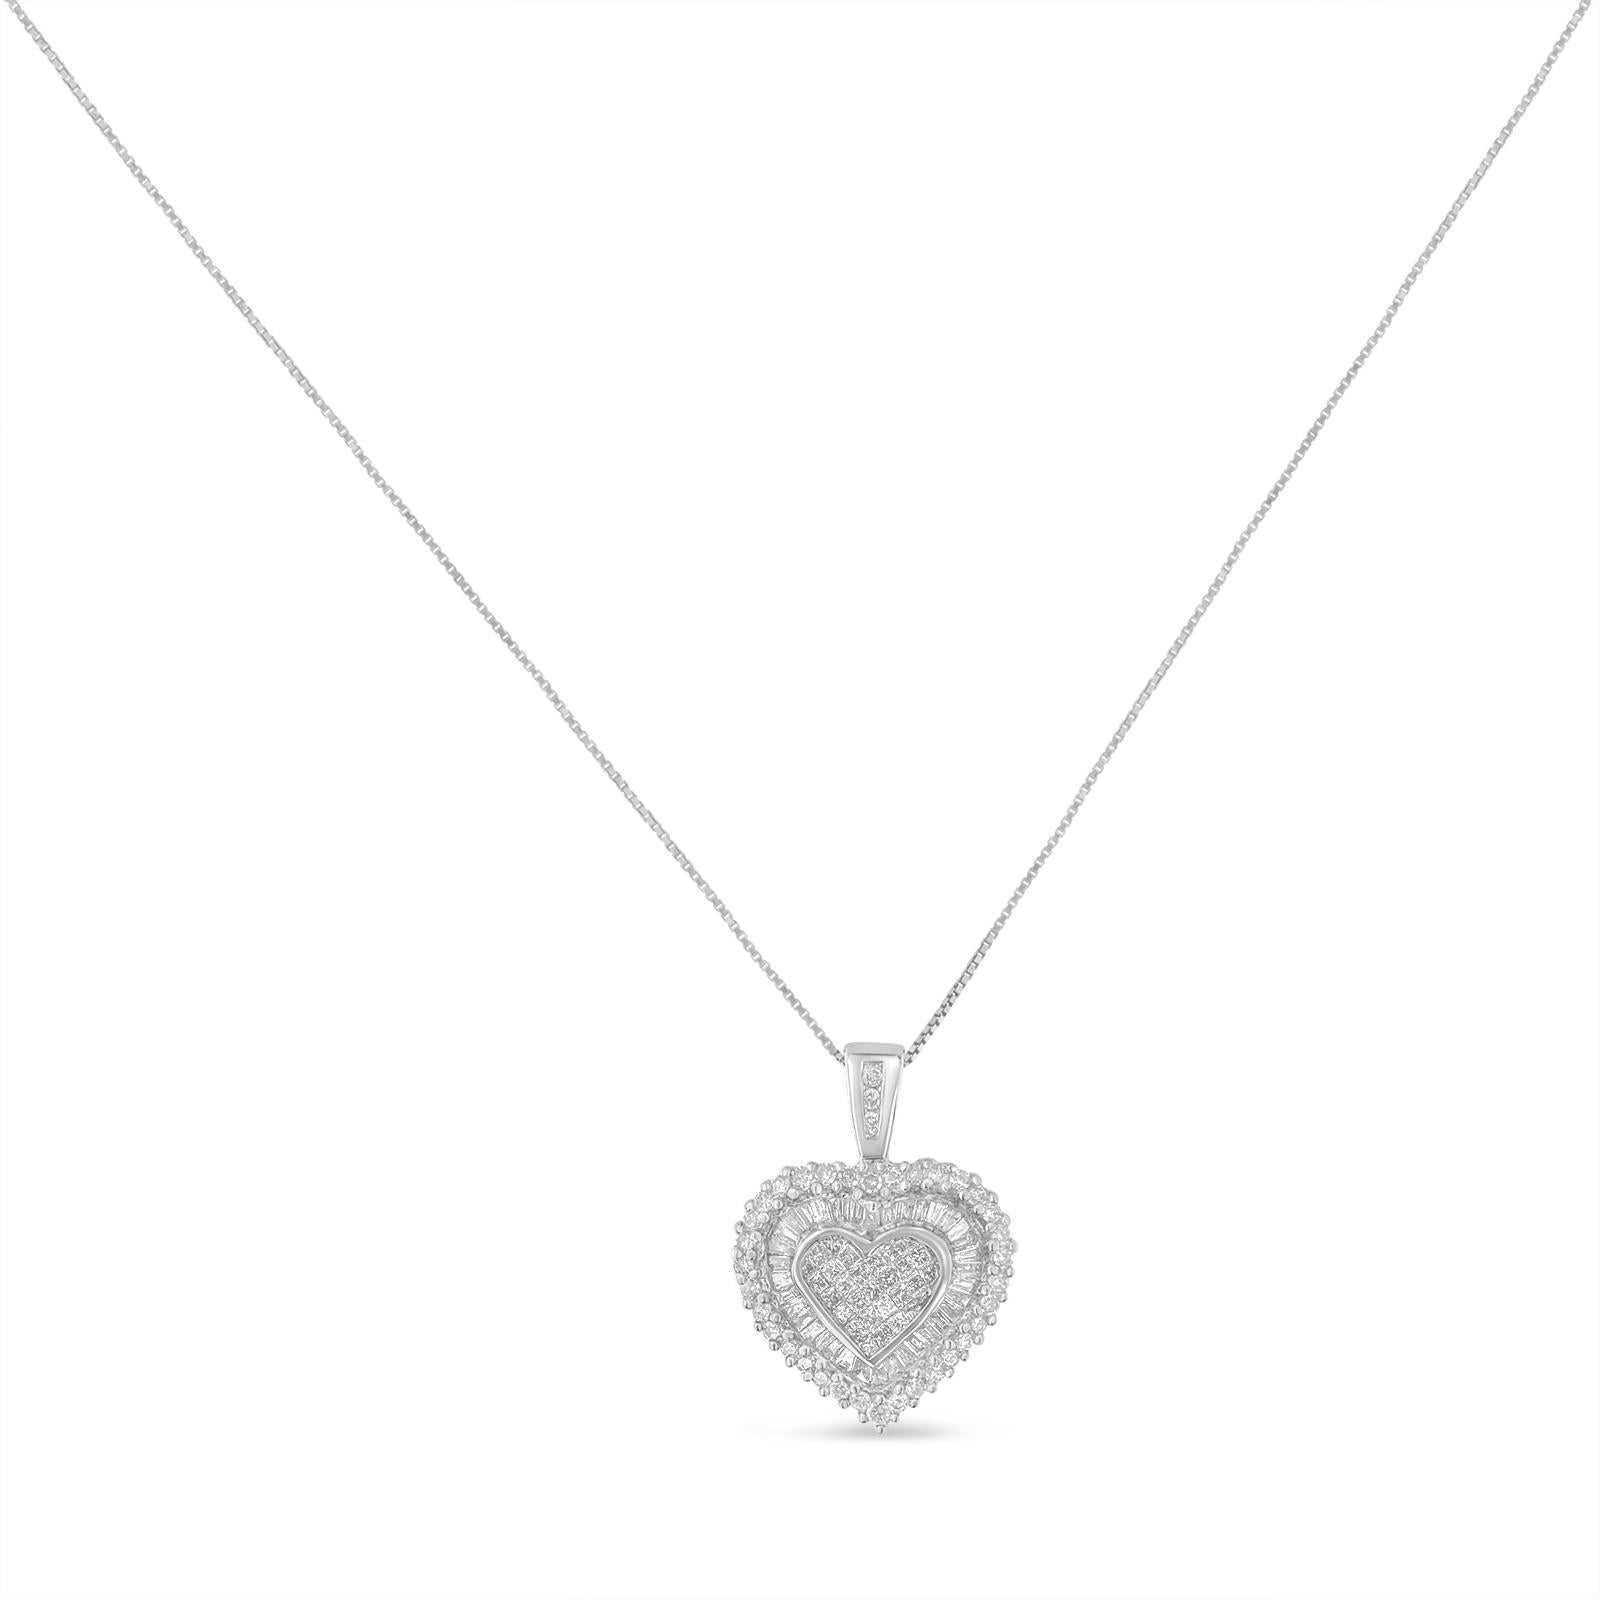 Let your love life touch the new heights of romance by giving her this beautiful diamond heart pendant. Encrusted with pave-set diamonds in multi-cuts the polished pendant is covered with white diamonds, which are princess, baguette, and round.